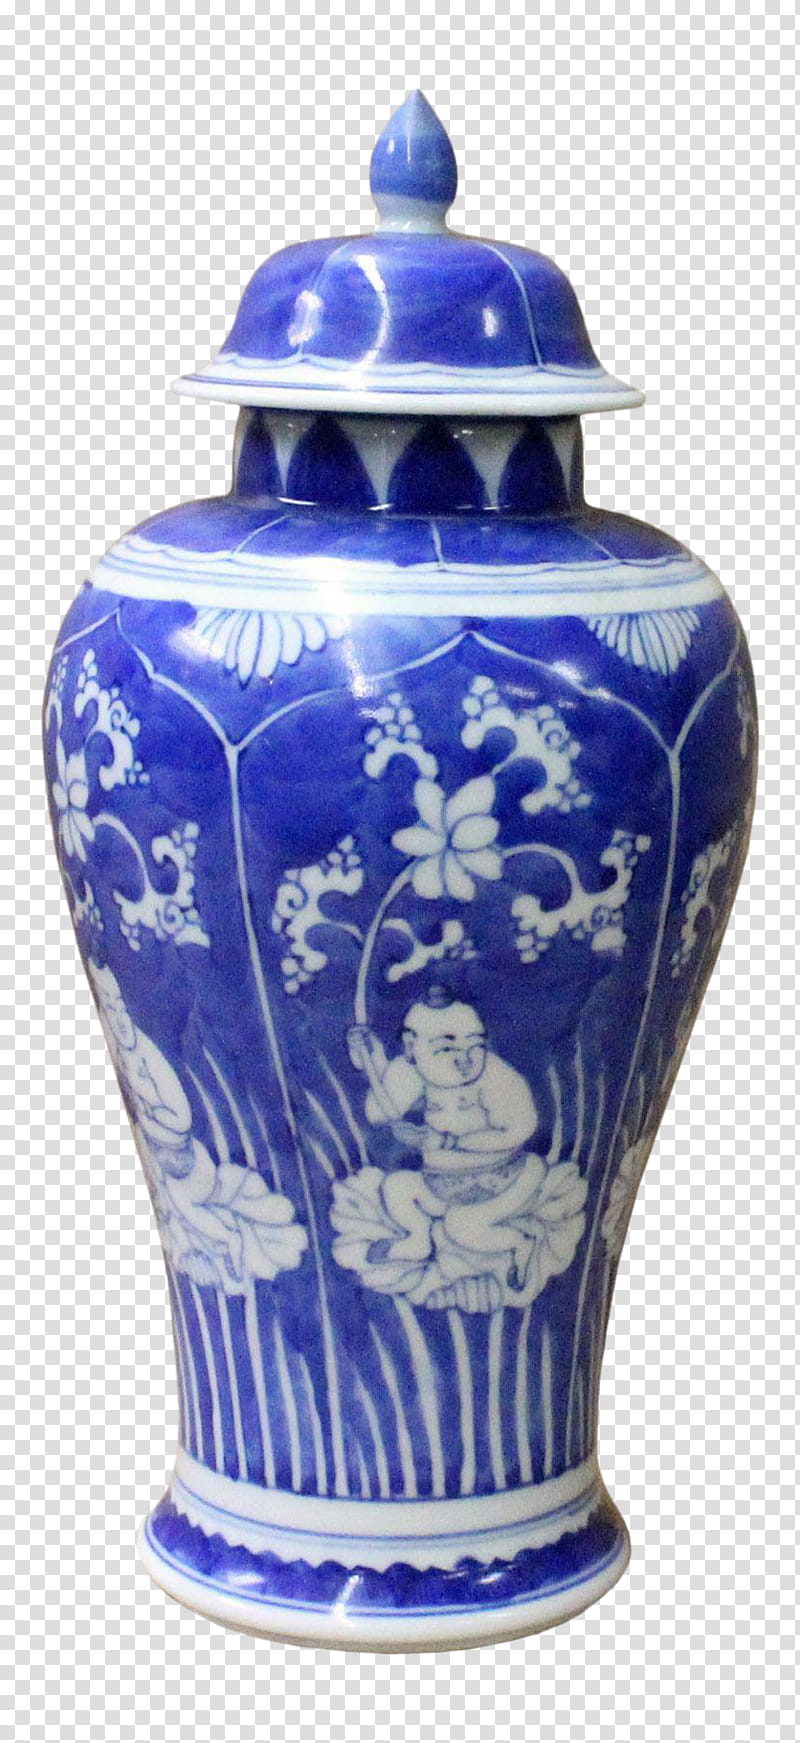 White Day, Blue And White Pottery, Vase, Porcelain, Container, Cobalt Blue, Jar, Urn transparent background PNG clipart